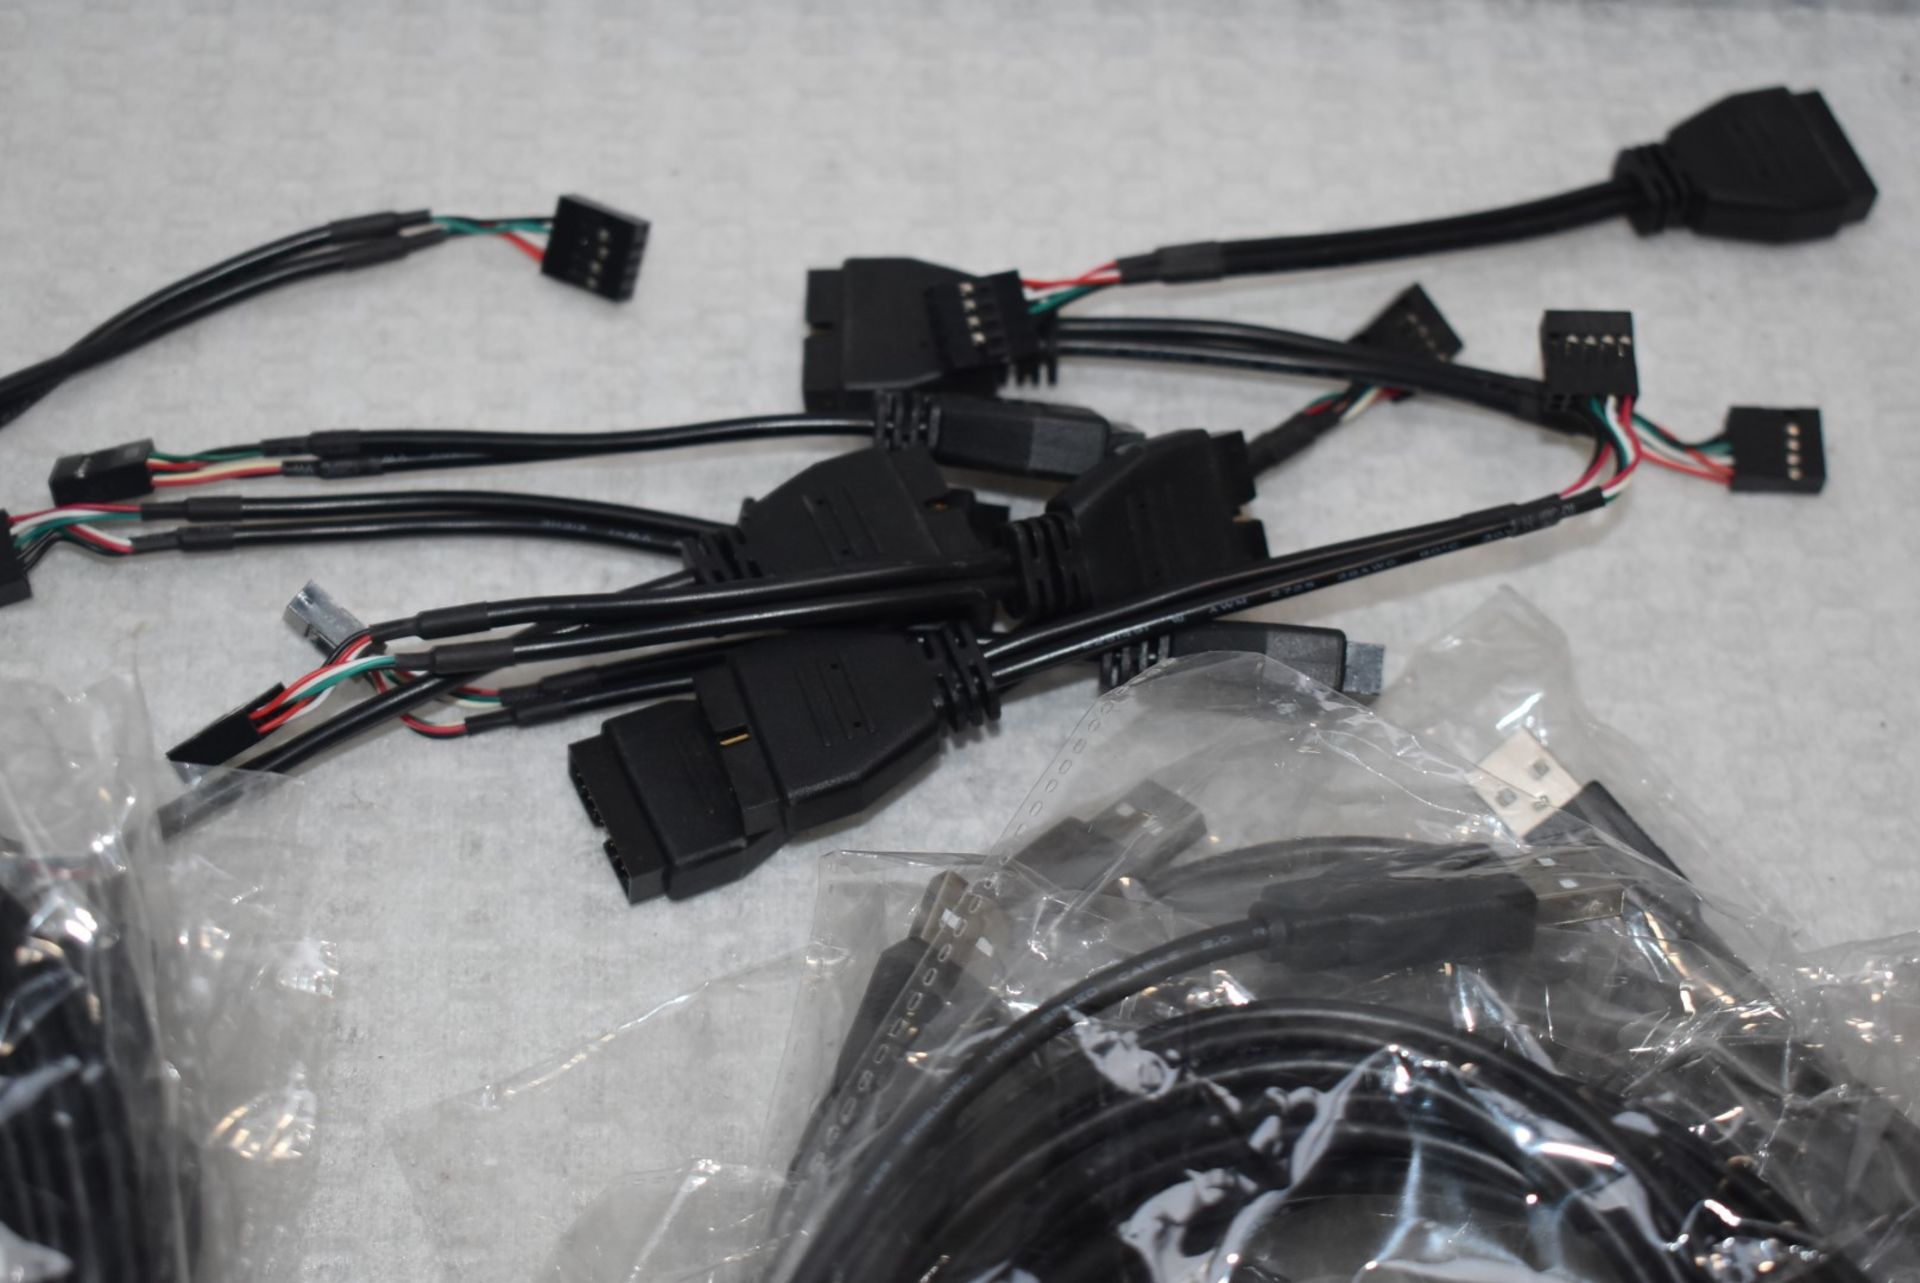 90 x Assorted Cables Including Various USB Connection Leads - New in Packets - Image 7 of 21